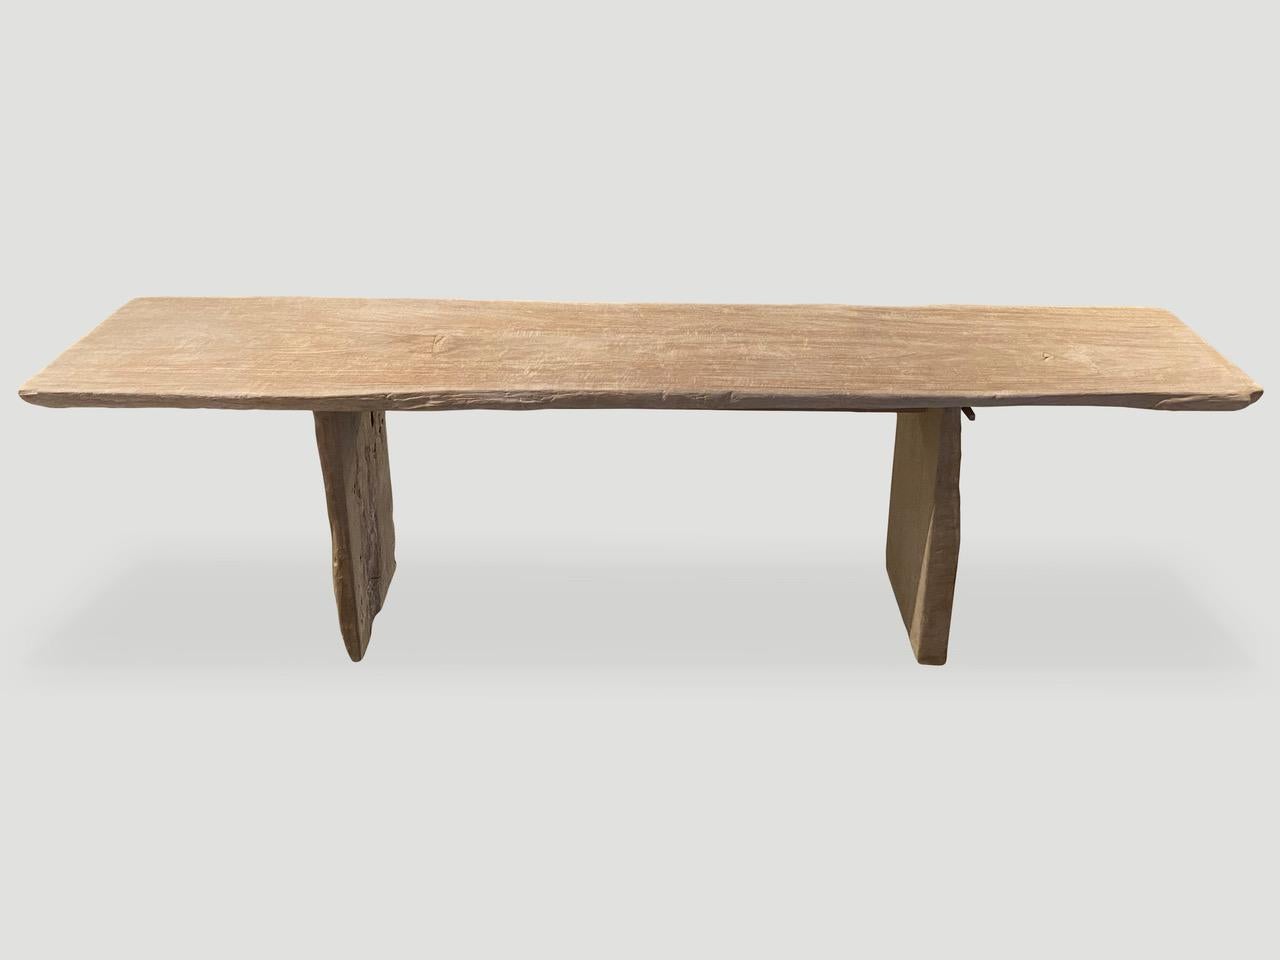 Andrianna Shamaris Live Edge Bleached Teak Wood Console Table In Excellent Condition For Sale In New York, NY